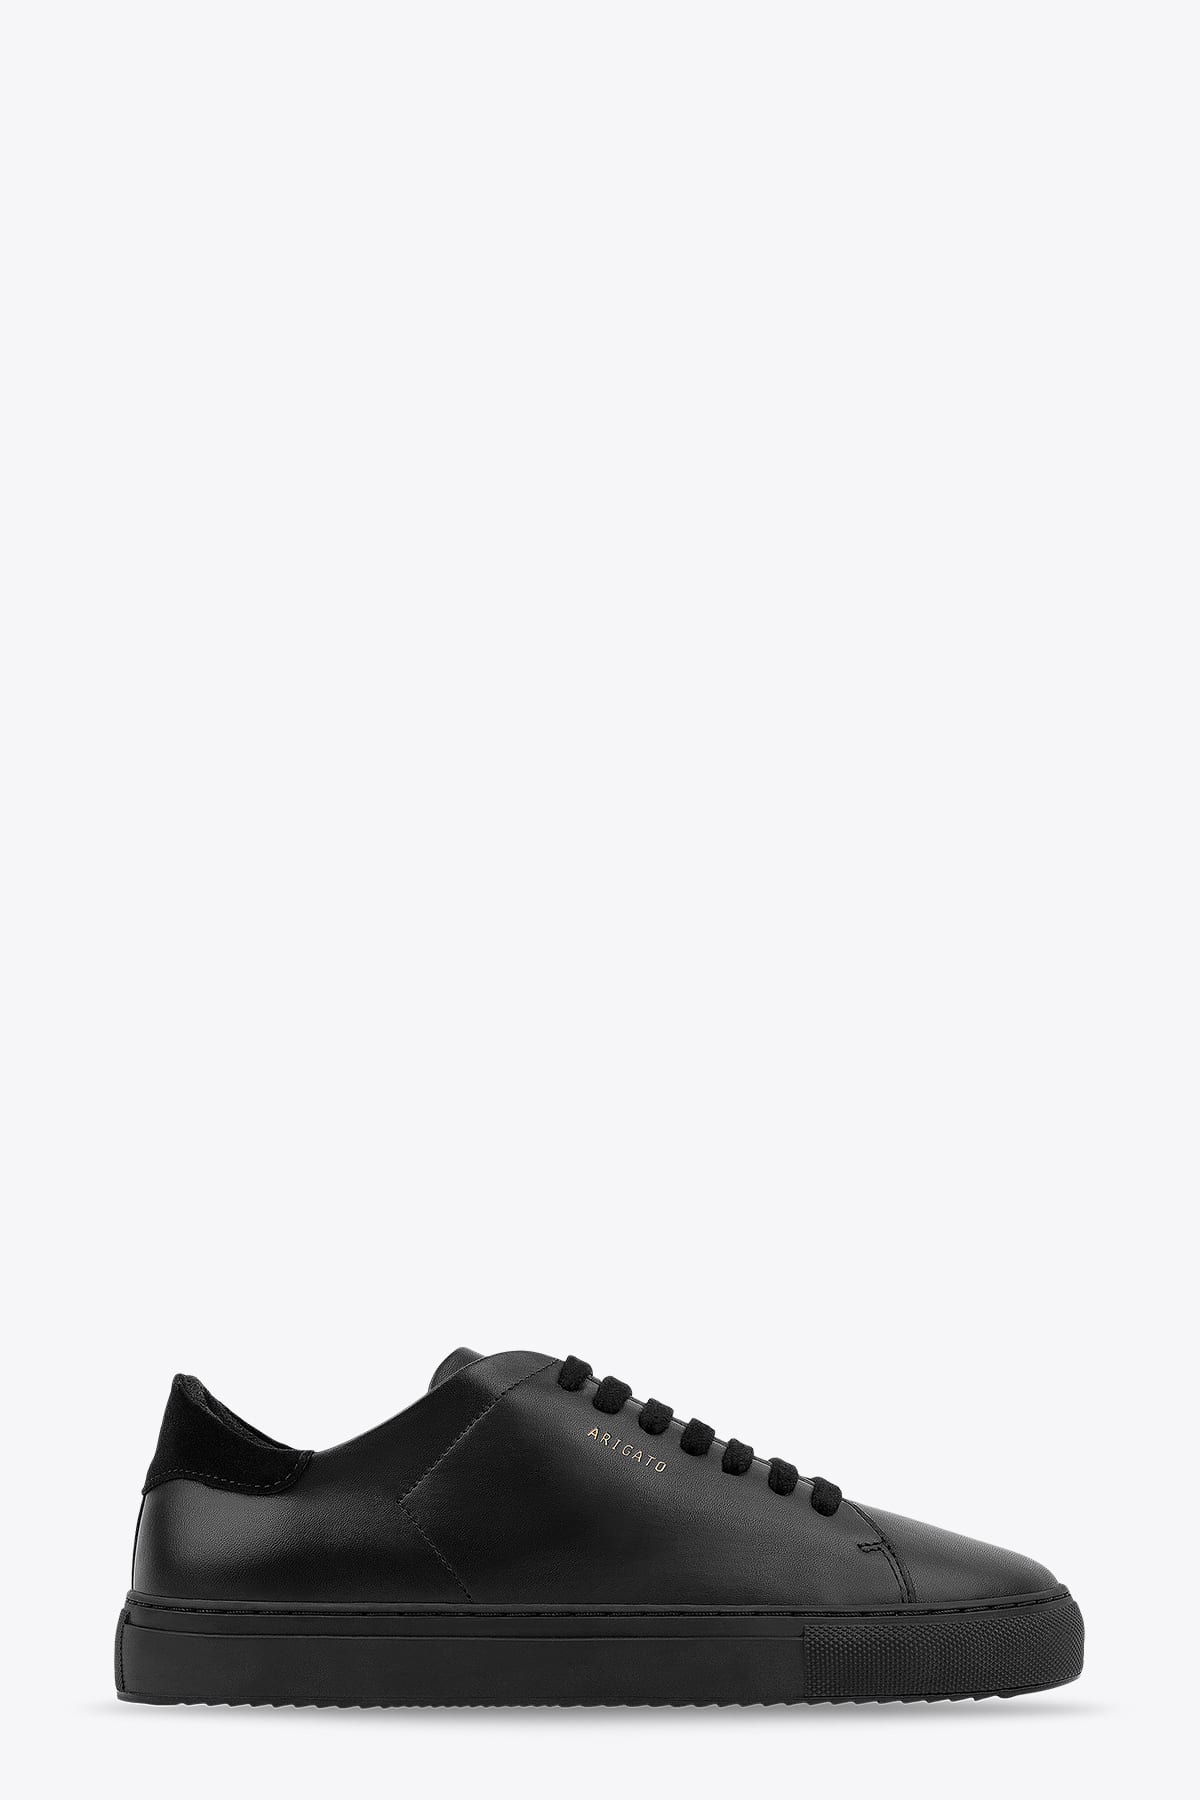 Axel Arigato Clean 90 Black leather low sneaker - Clean 90